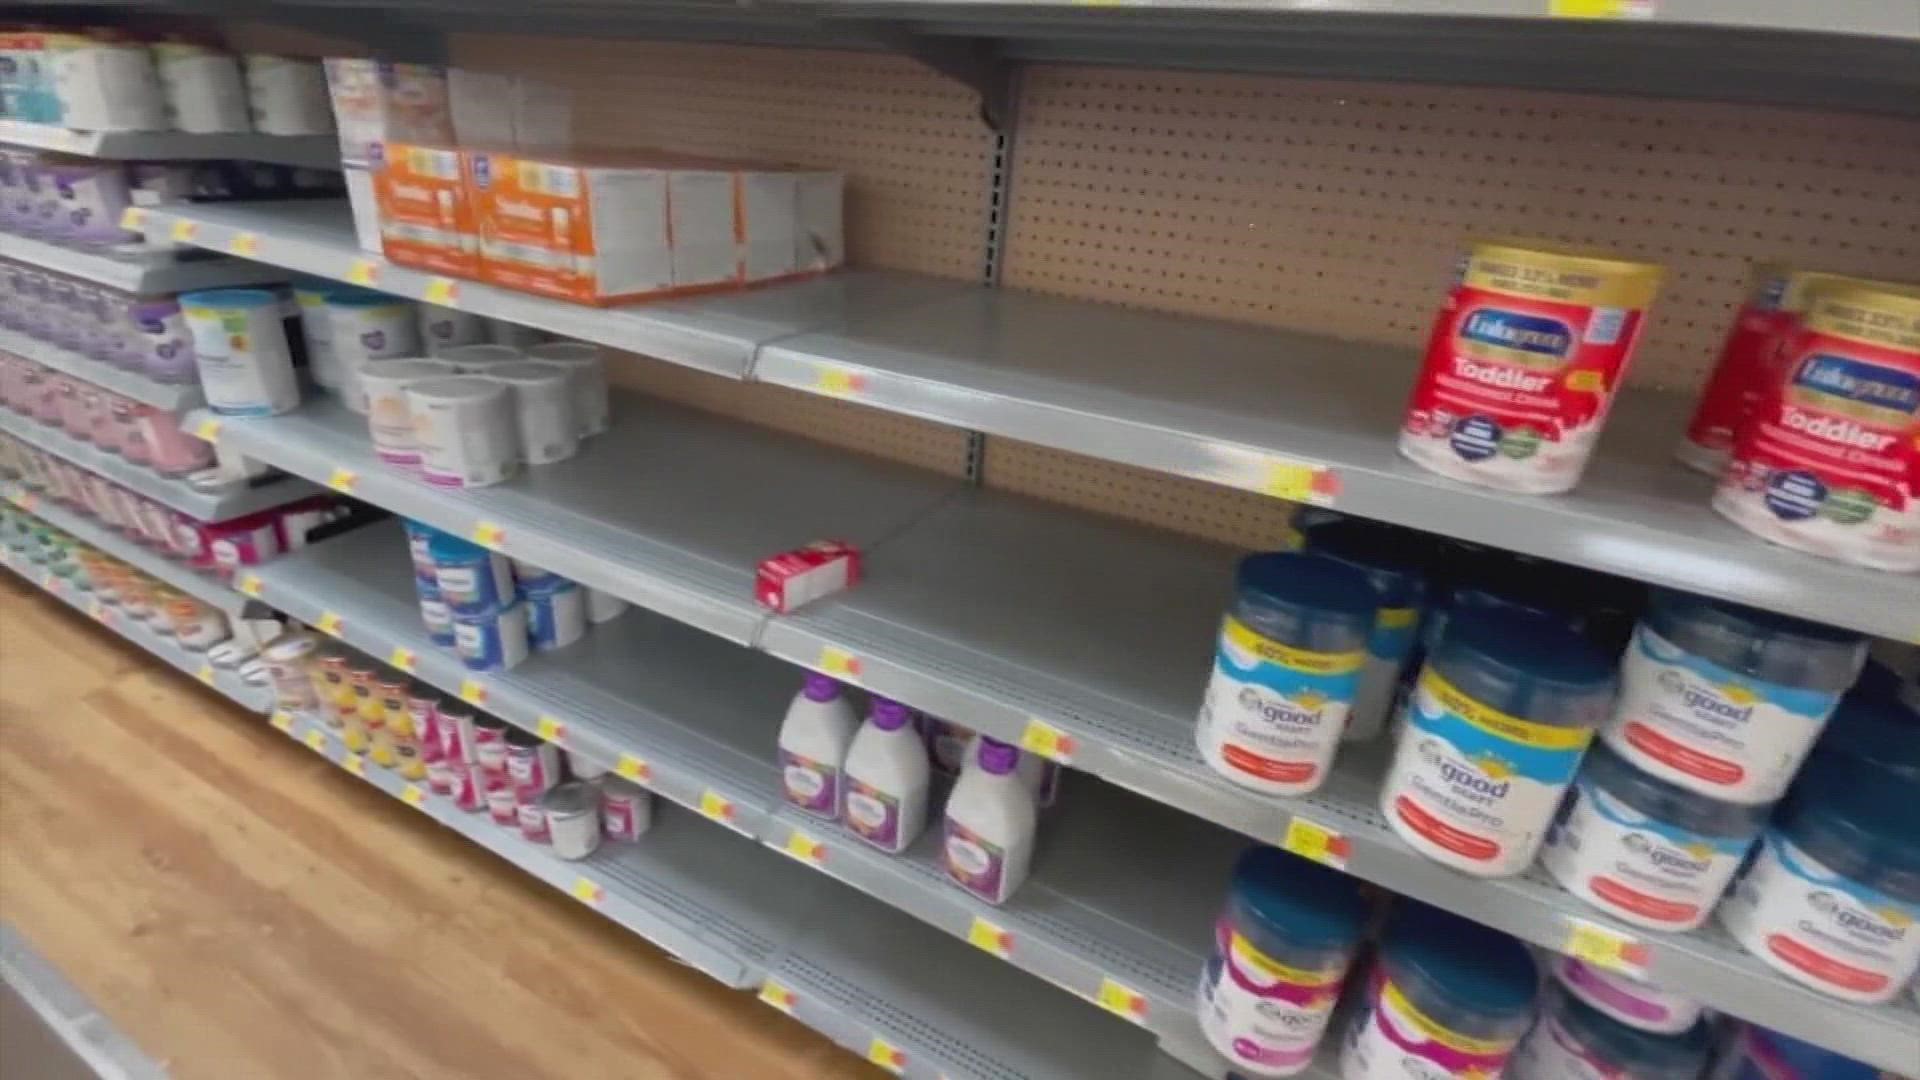 The nationwide baby formula shortage is creating panicked mothers. So we took spoke to doctors who shared tips on what mothers could do to feed their infants.